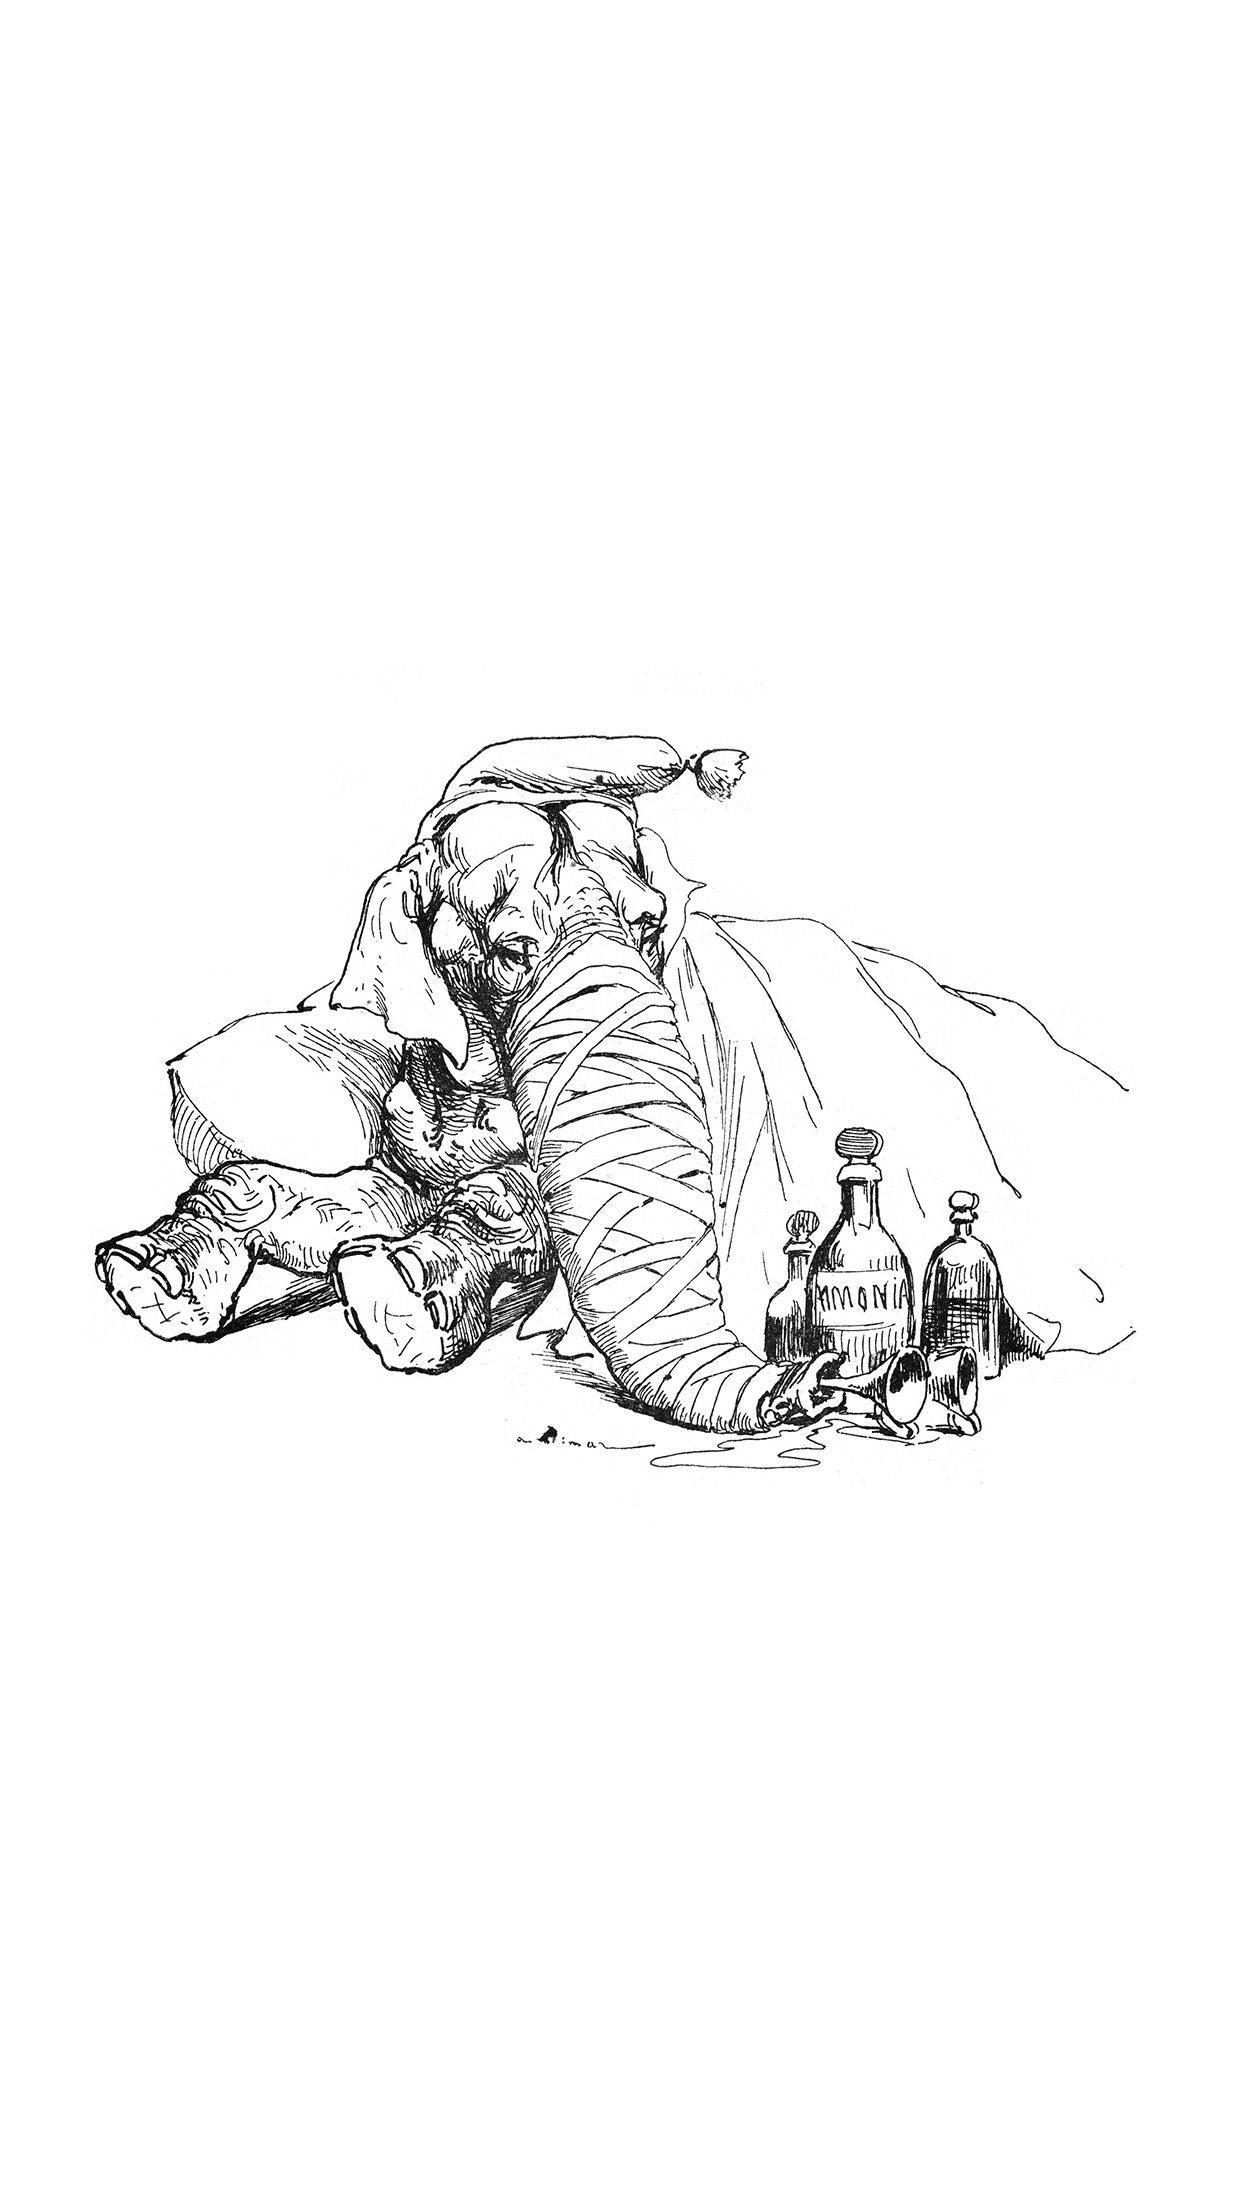 A drawing of an elephant and some people - Elephant